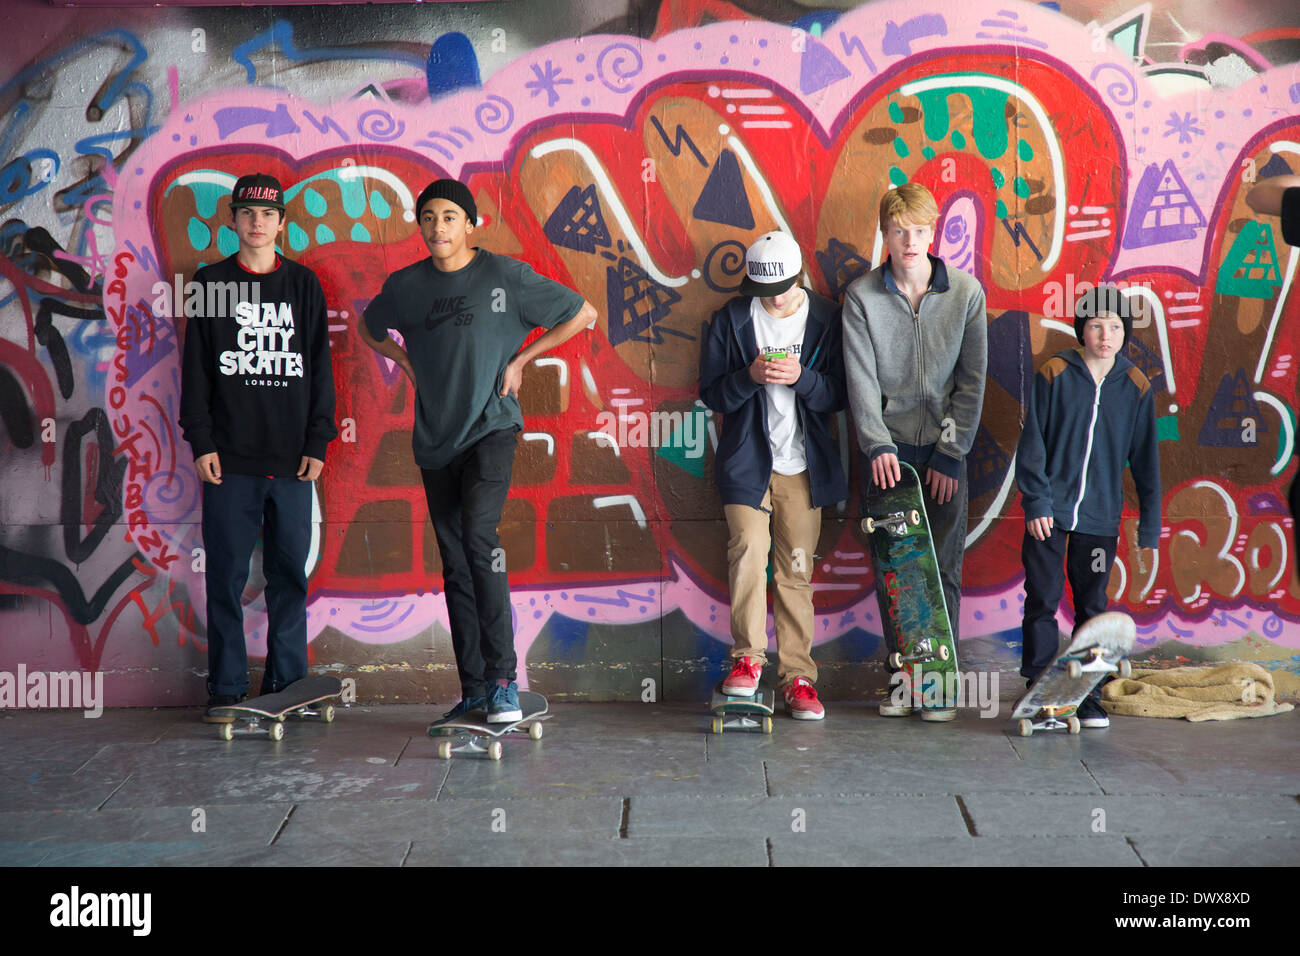 The undercroft of the Queen Elizabeth Hall on the South Bank has been popular with skateboarders since the 1970s. London, UK. Stock Photo